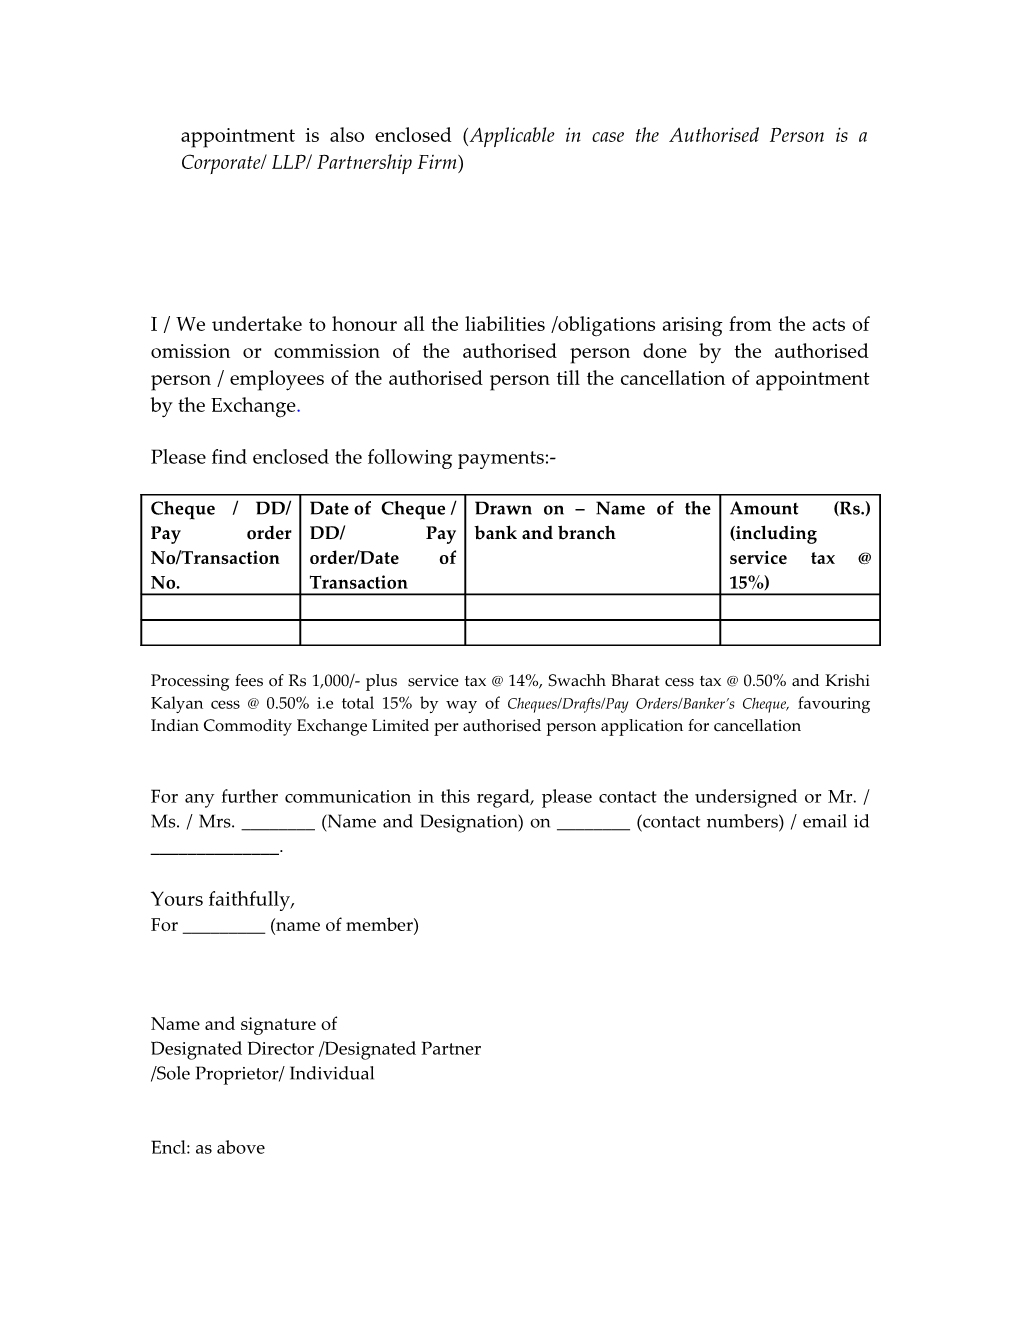 Format of Documents